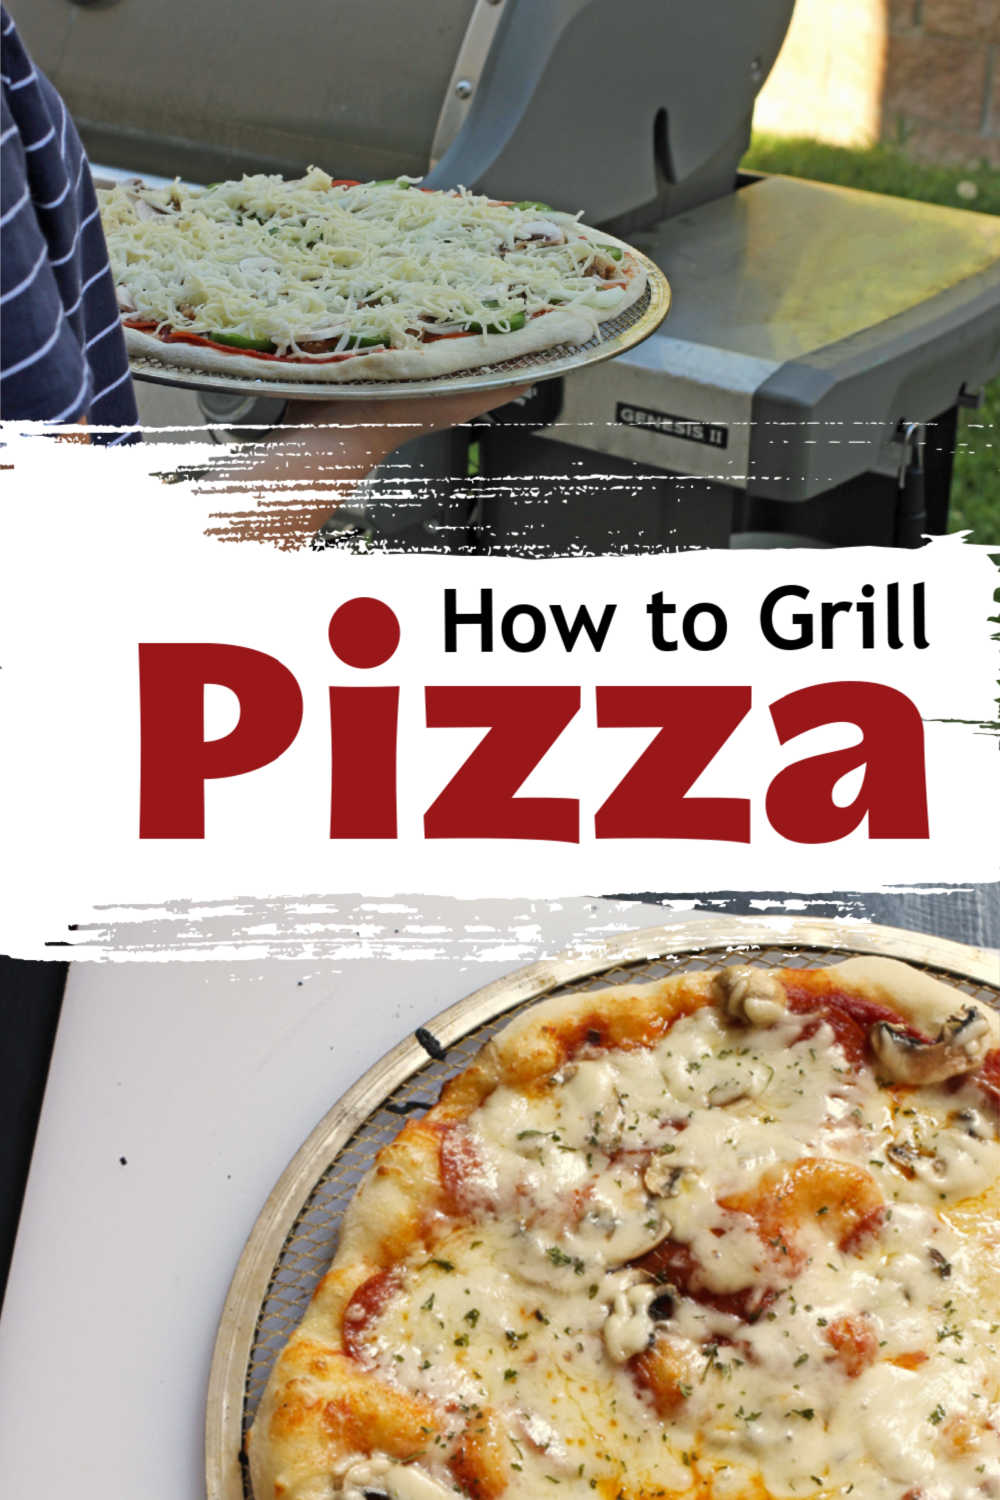 placing a pizza on the grill, with cooked pizza on side